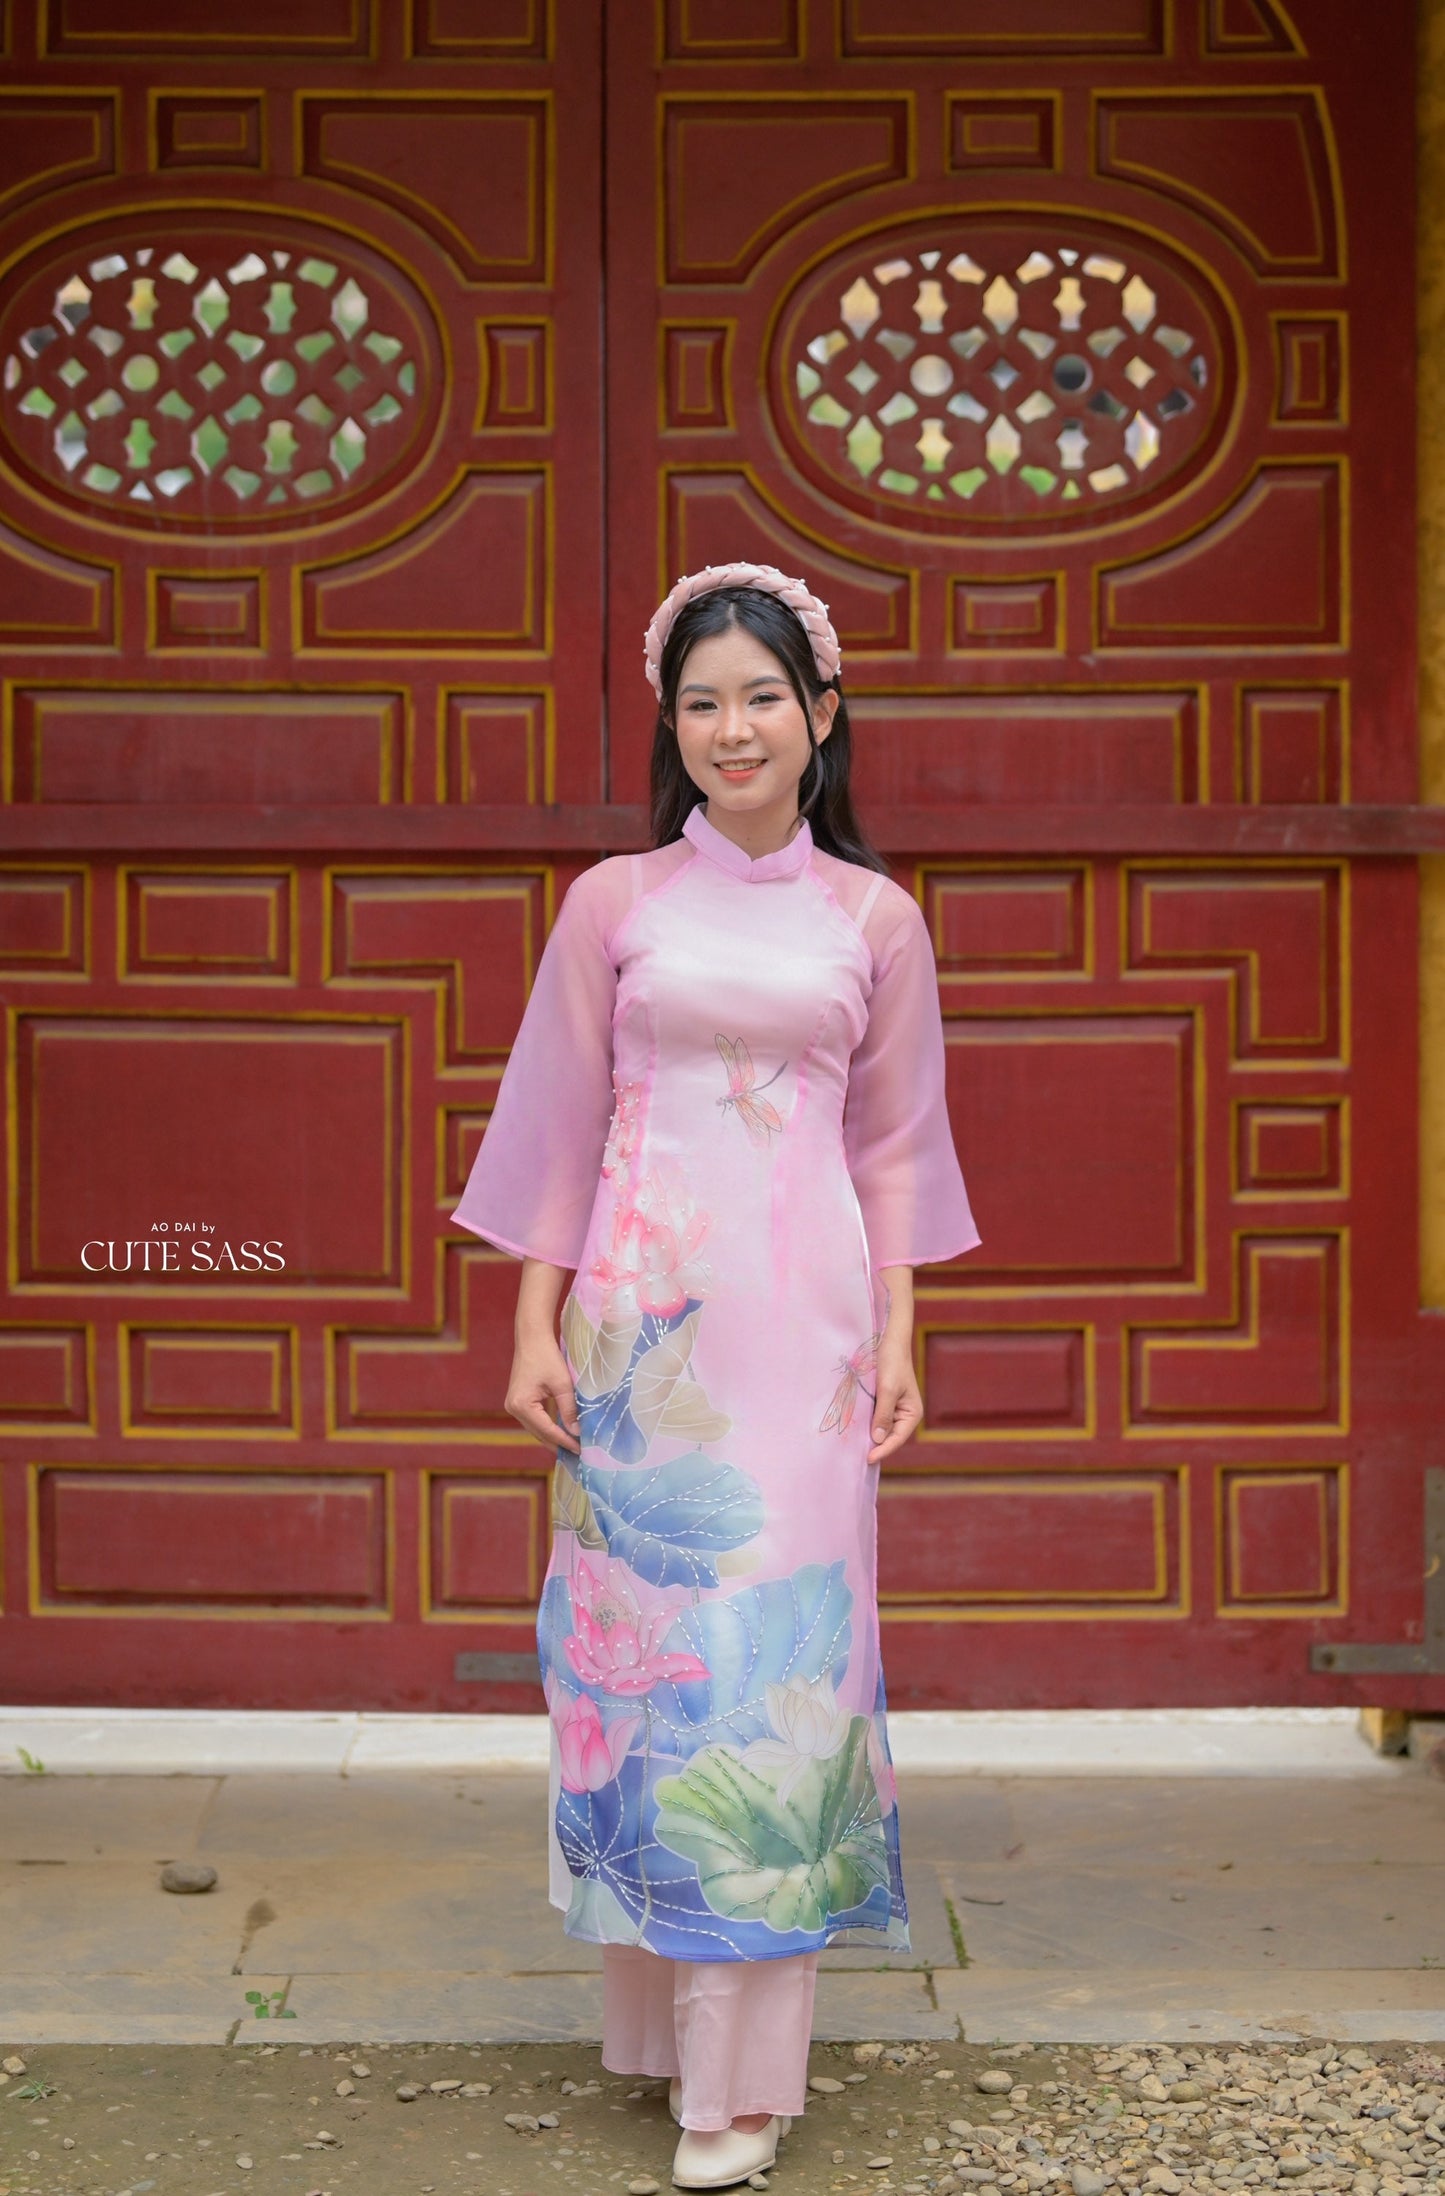 Pastel Lavender Sparkle Lotus Ao Dai Set: This Pastel Lavender Sparkle Lotus Ao Dai Set is a dreamy, elegant piece that will make you feel like a princess. The set is made with high-quality materials and features a beautiful lotus flower design that sparkles in the light. Perfect for a special occasion or photoshoot, this set will leave you feeling confident and glamorous.